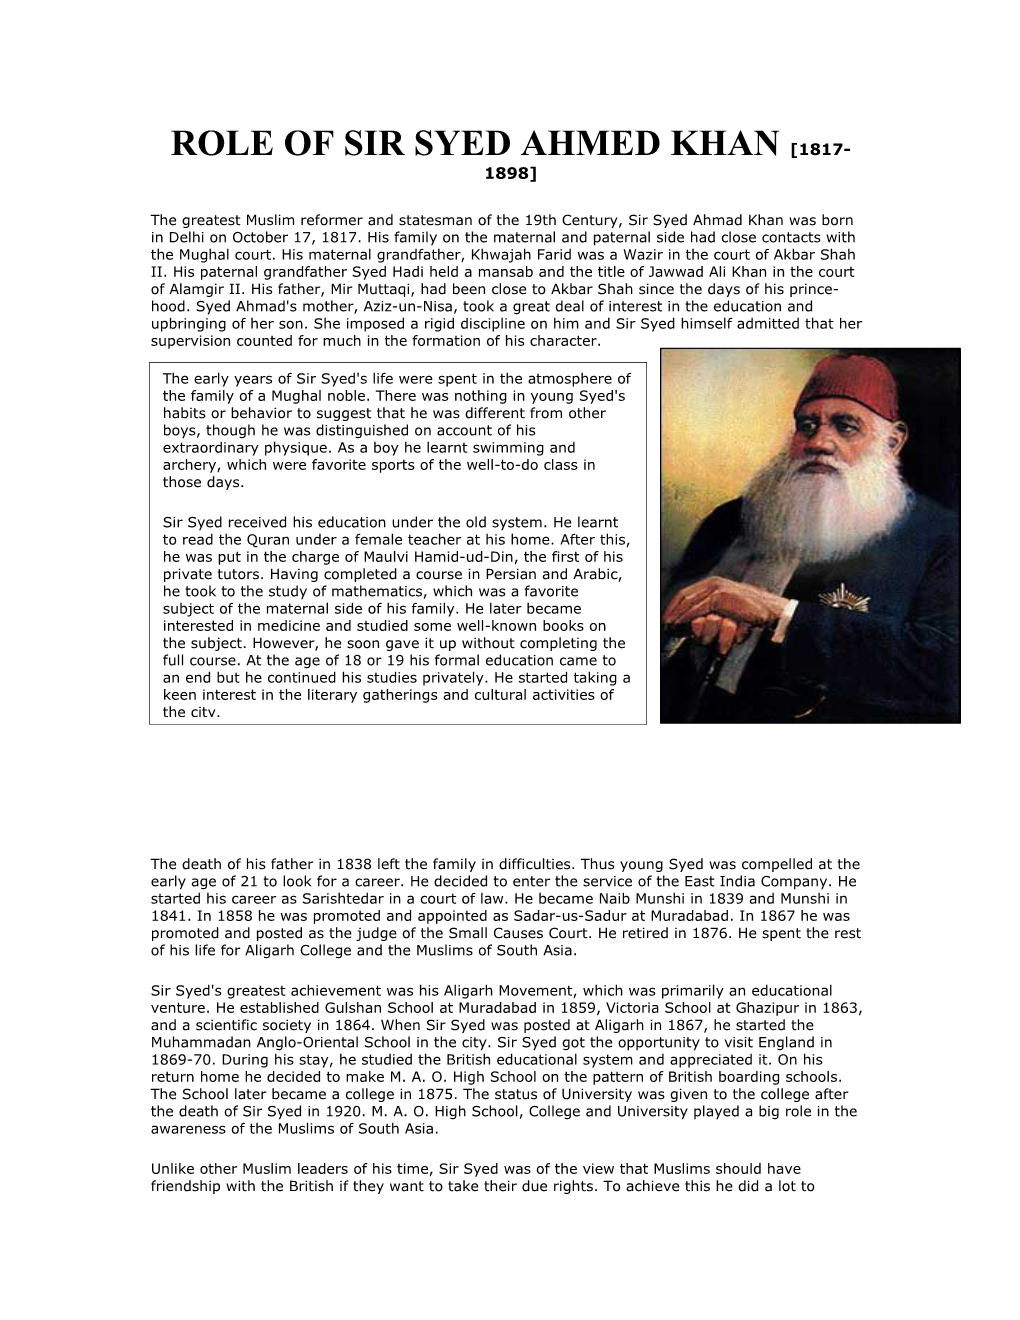 Role of Sir Syed Ahmed Khan